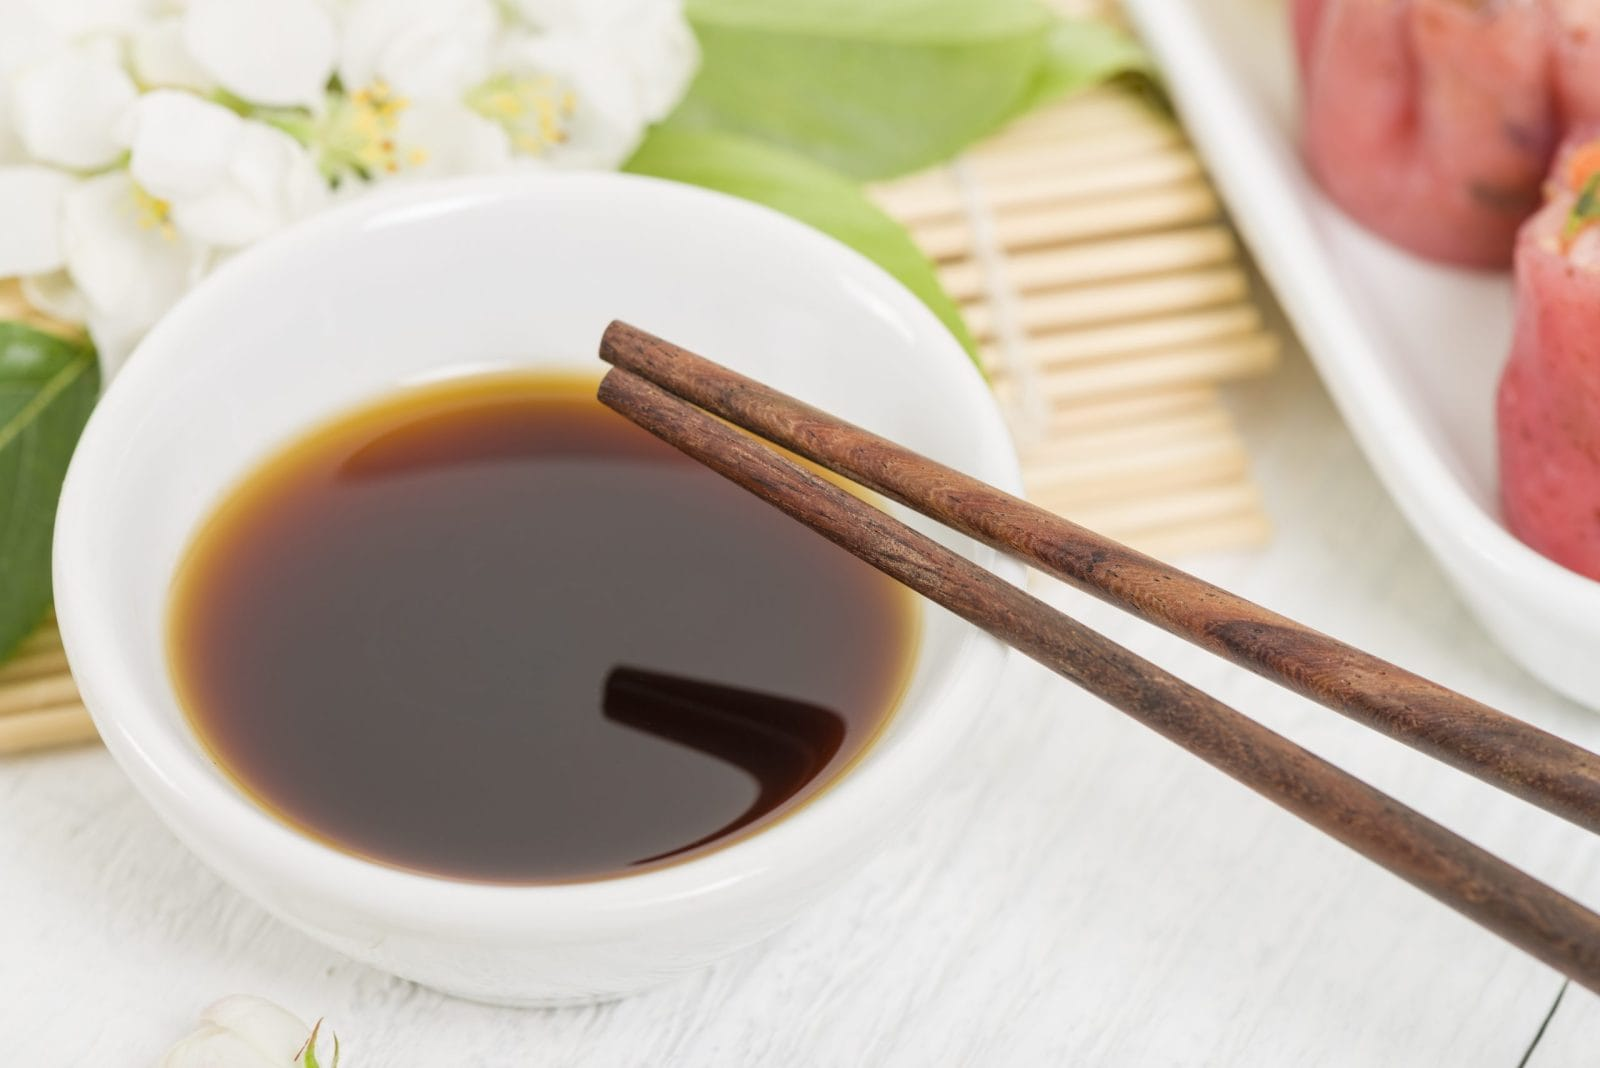 popular soy sauce substitutes, fermented coconut sap